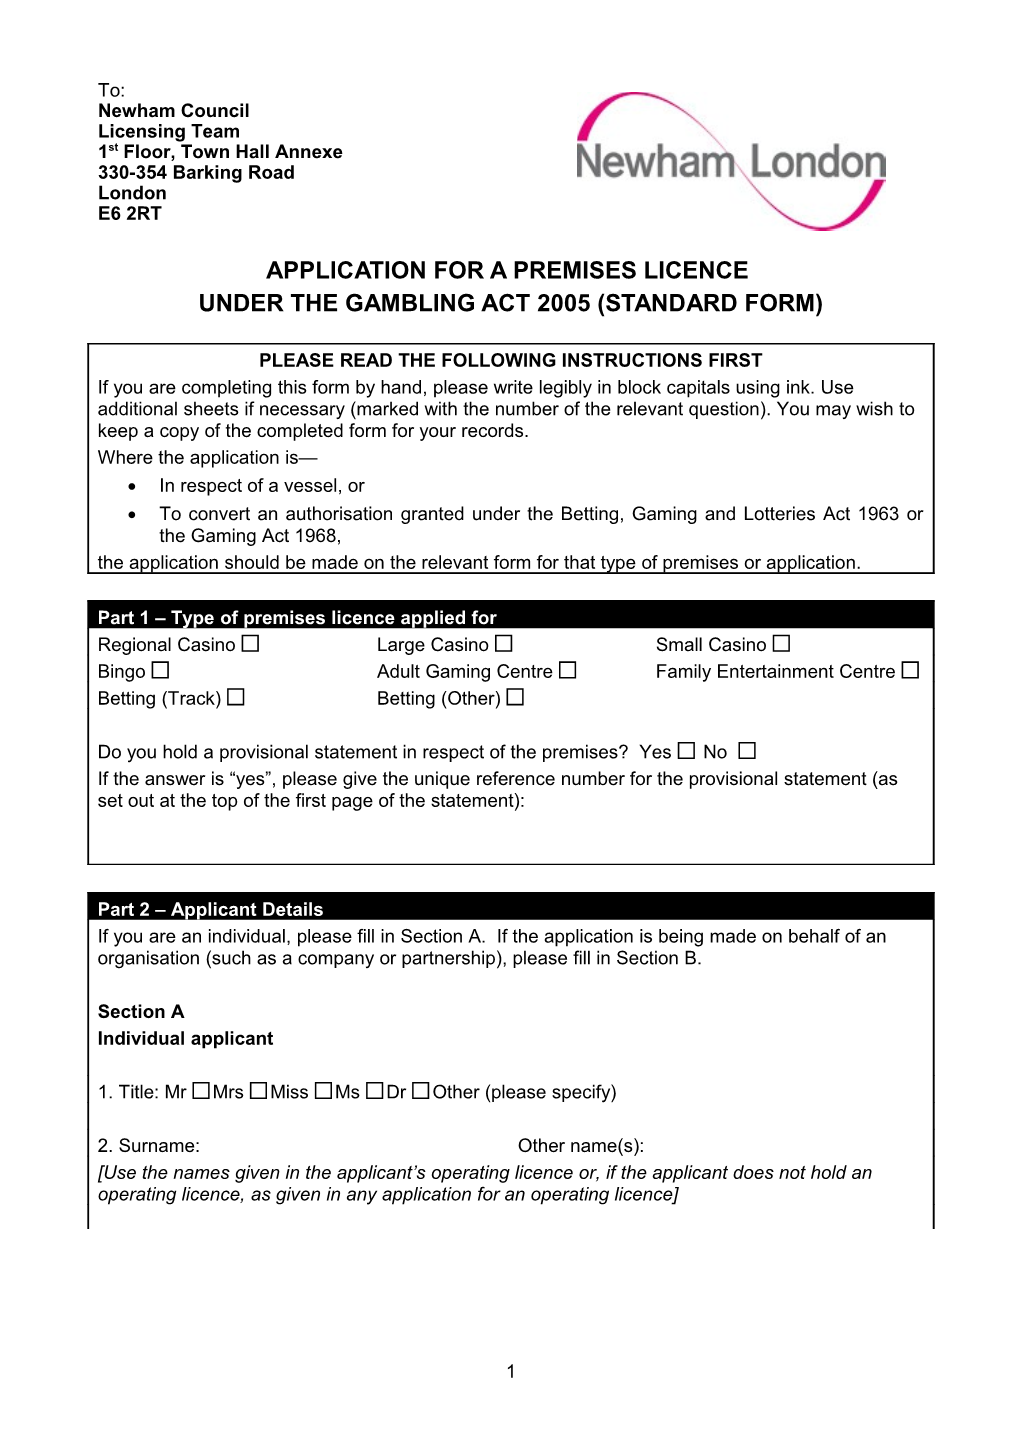 Application for a Gambling Premises Licence